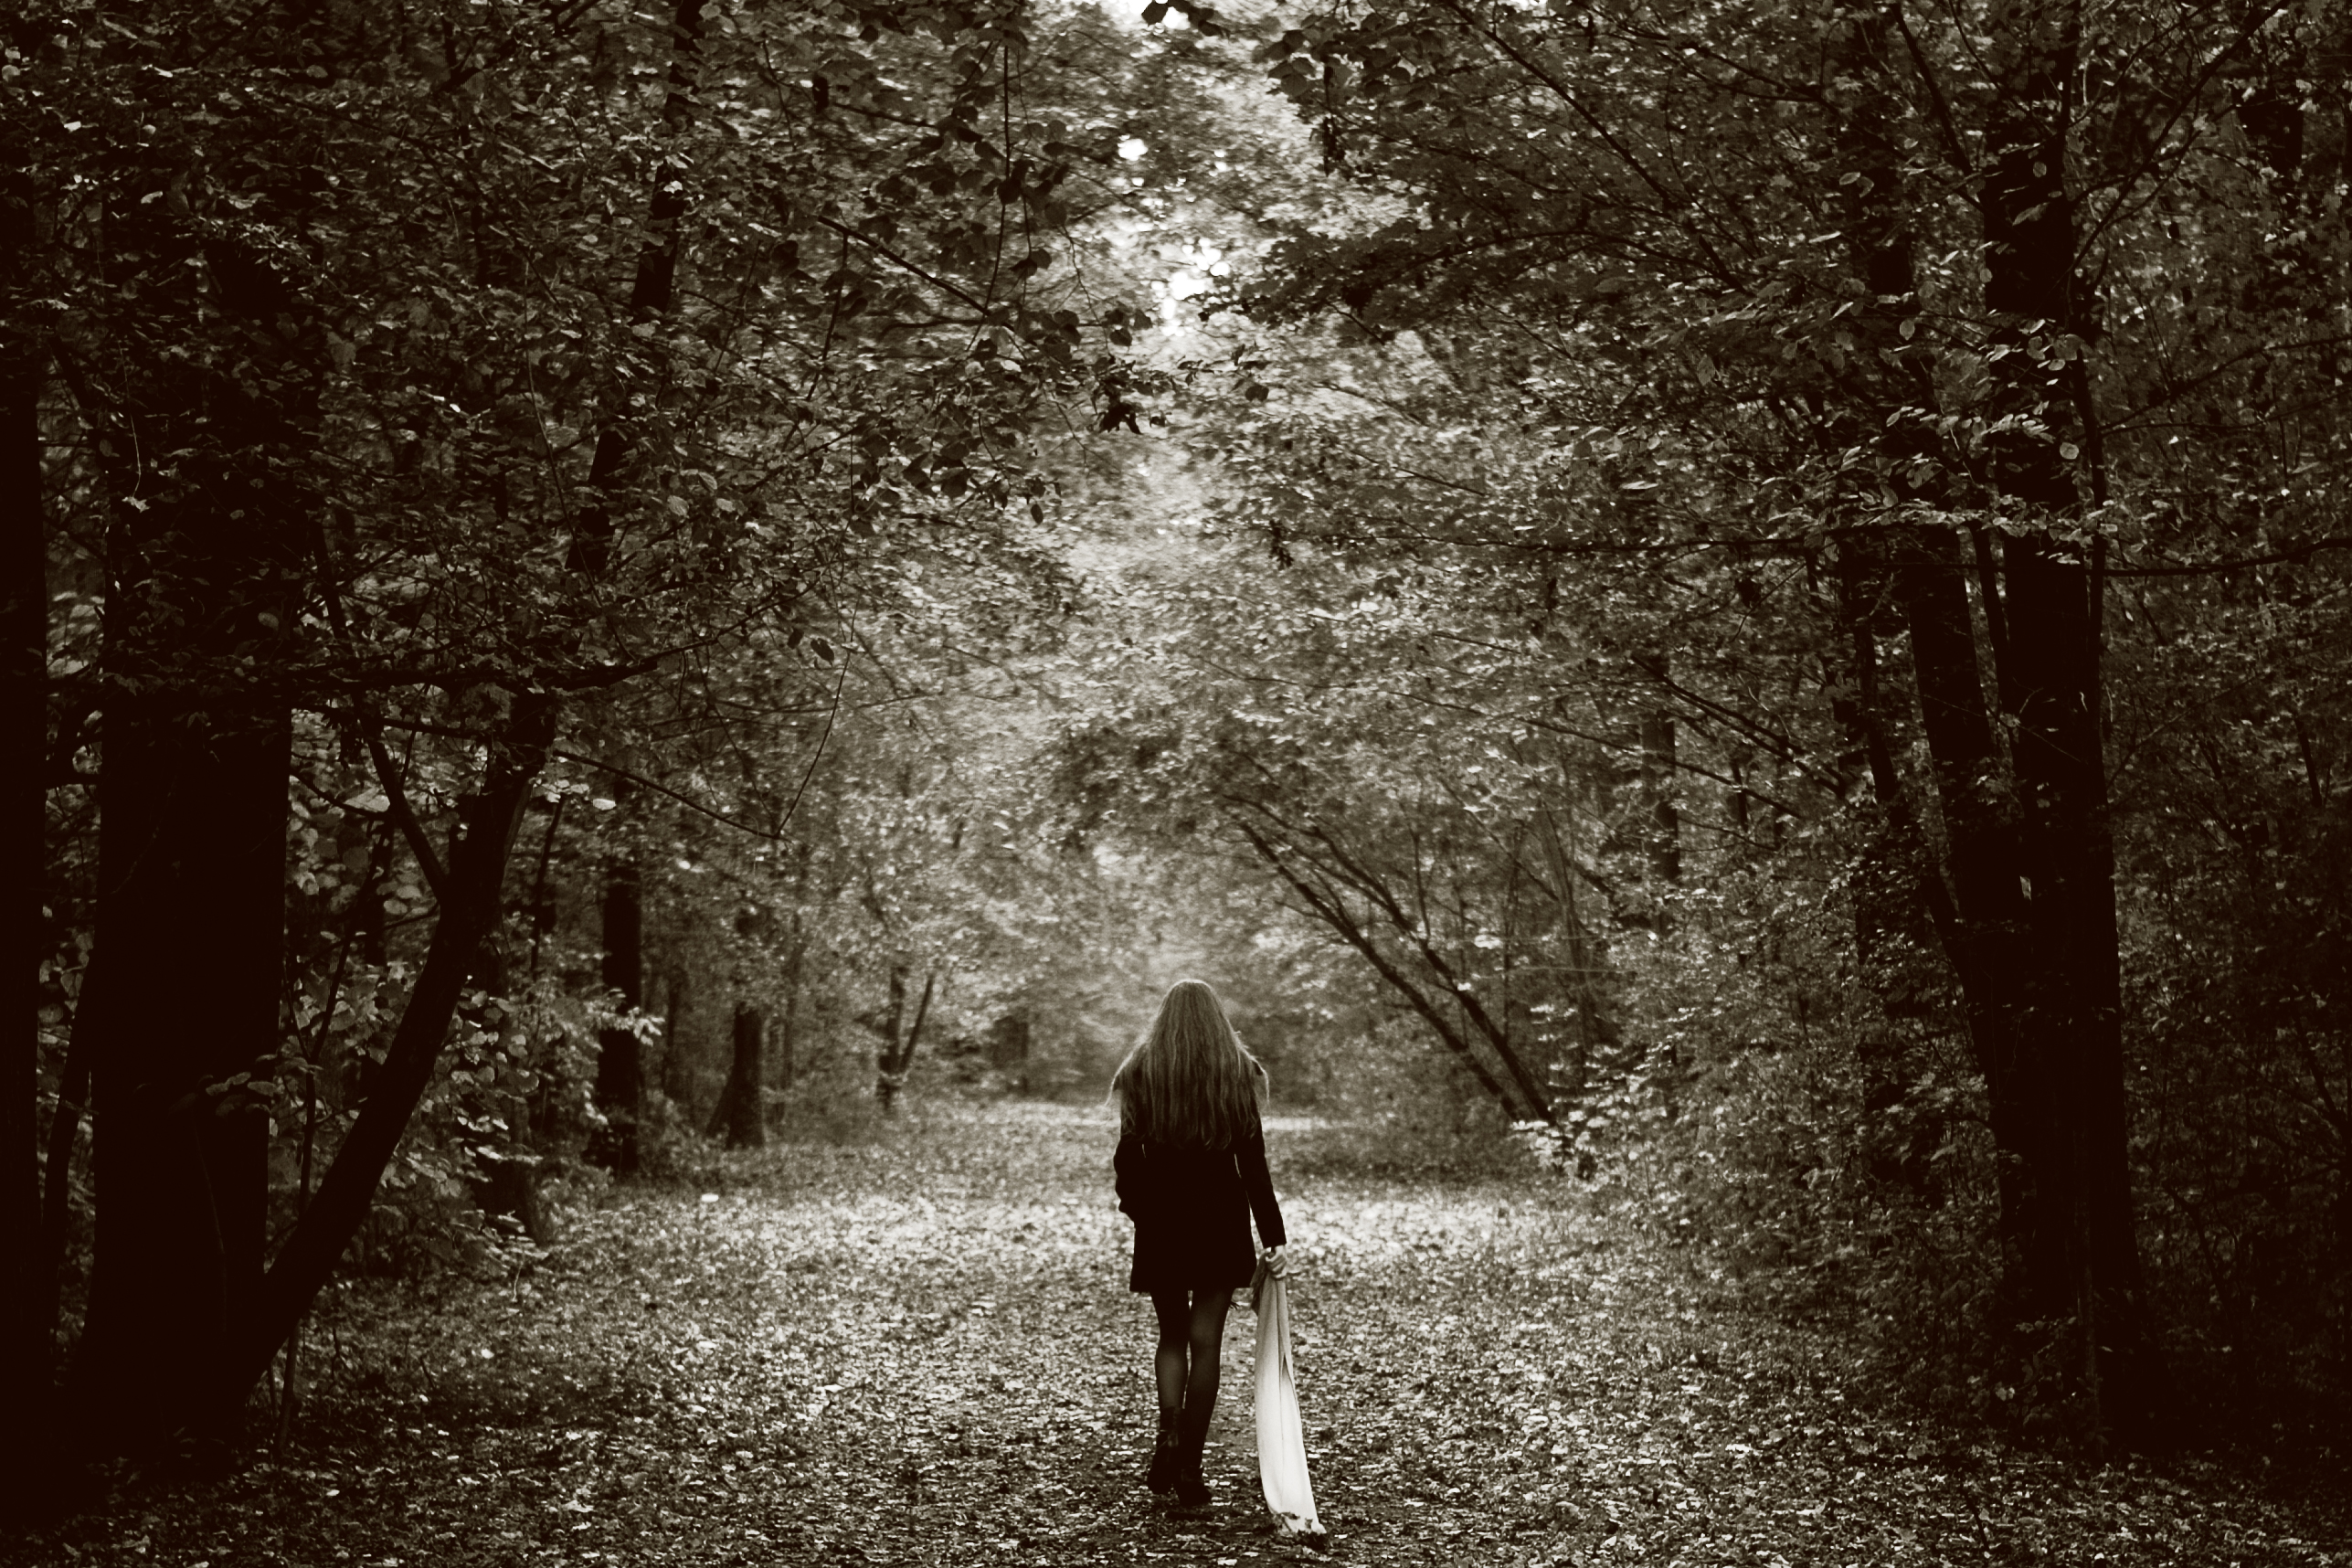 Women in the woods on a trail in black and white